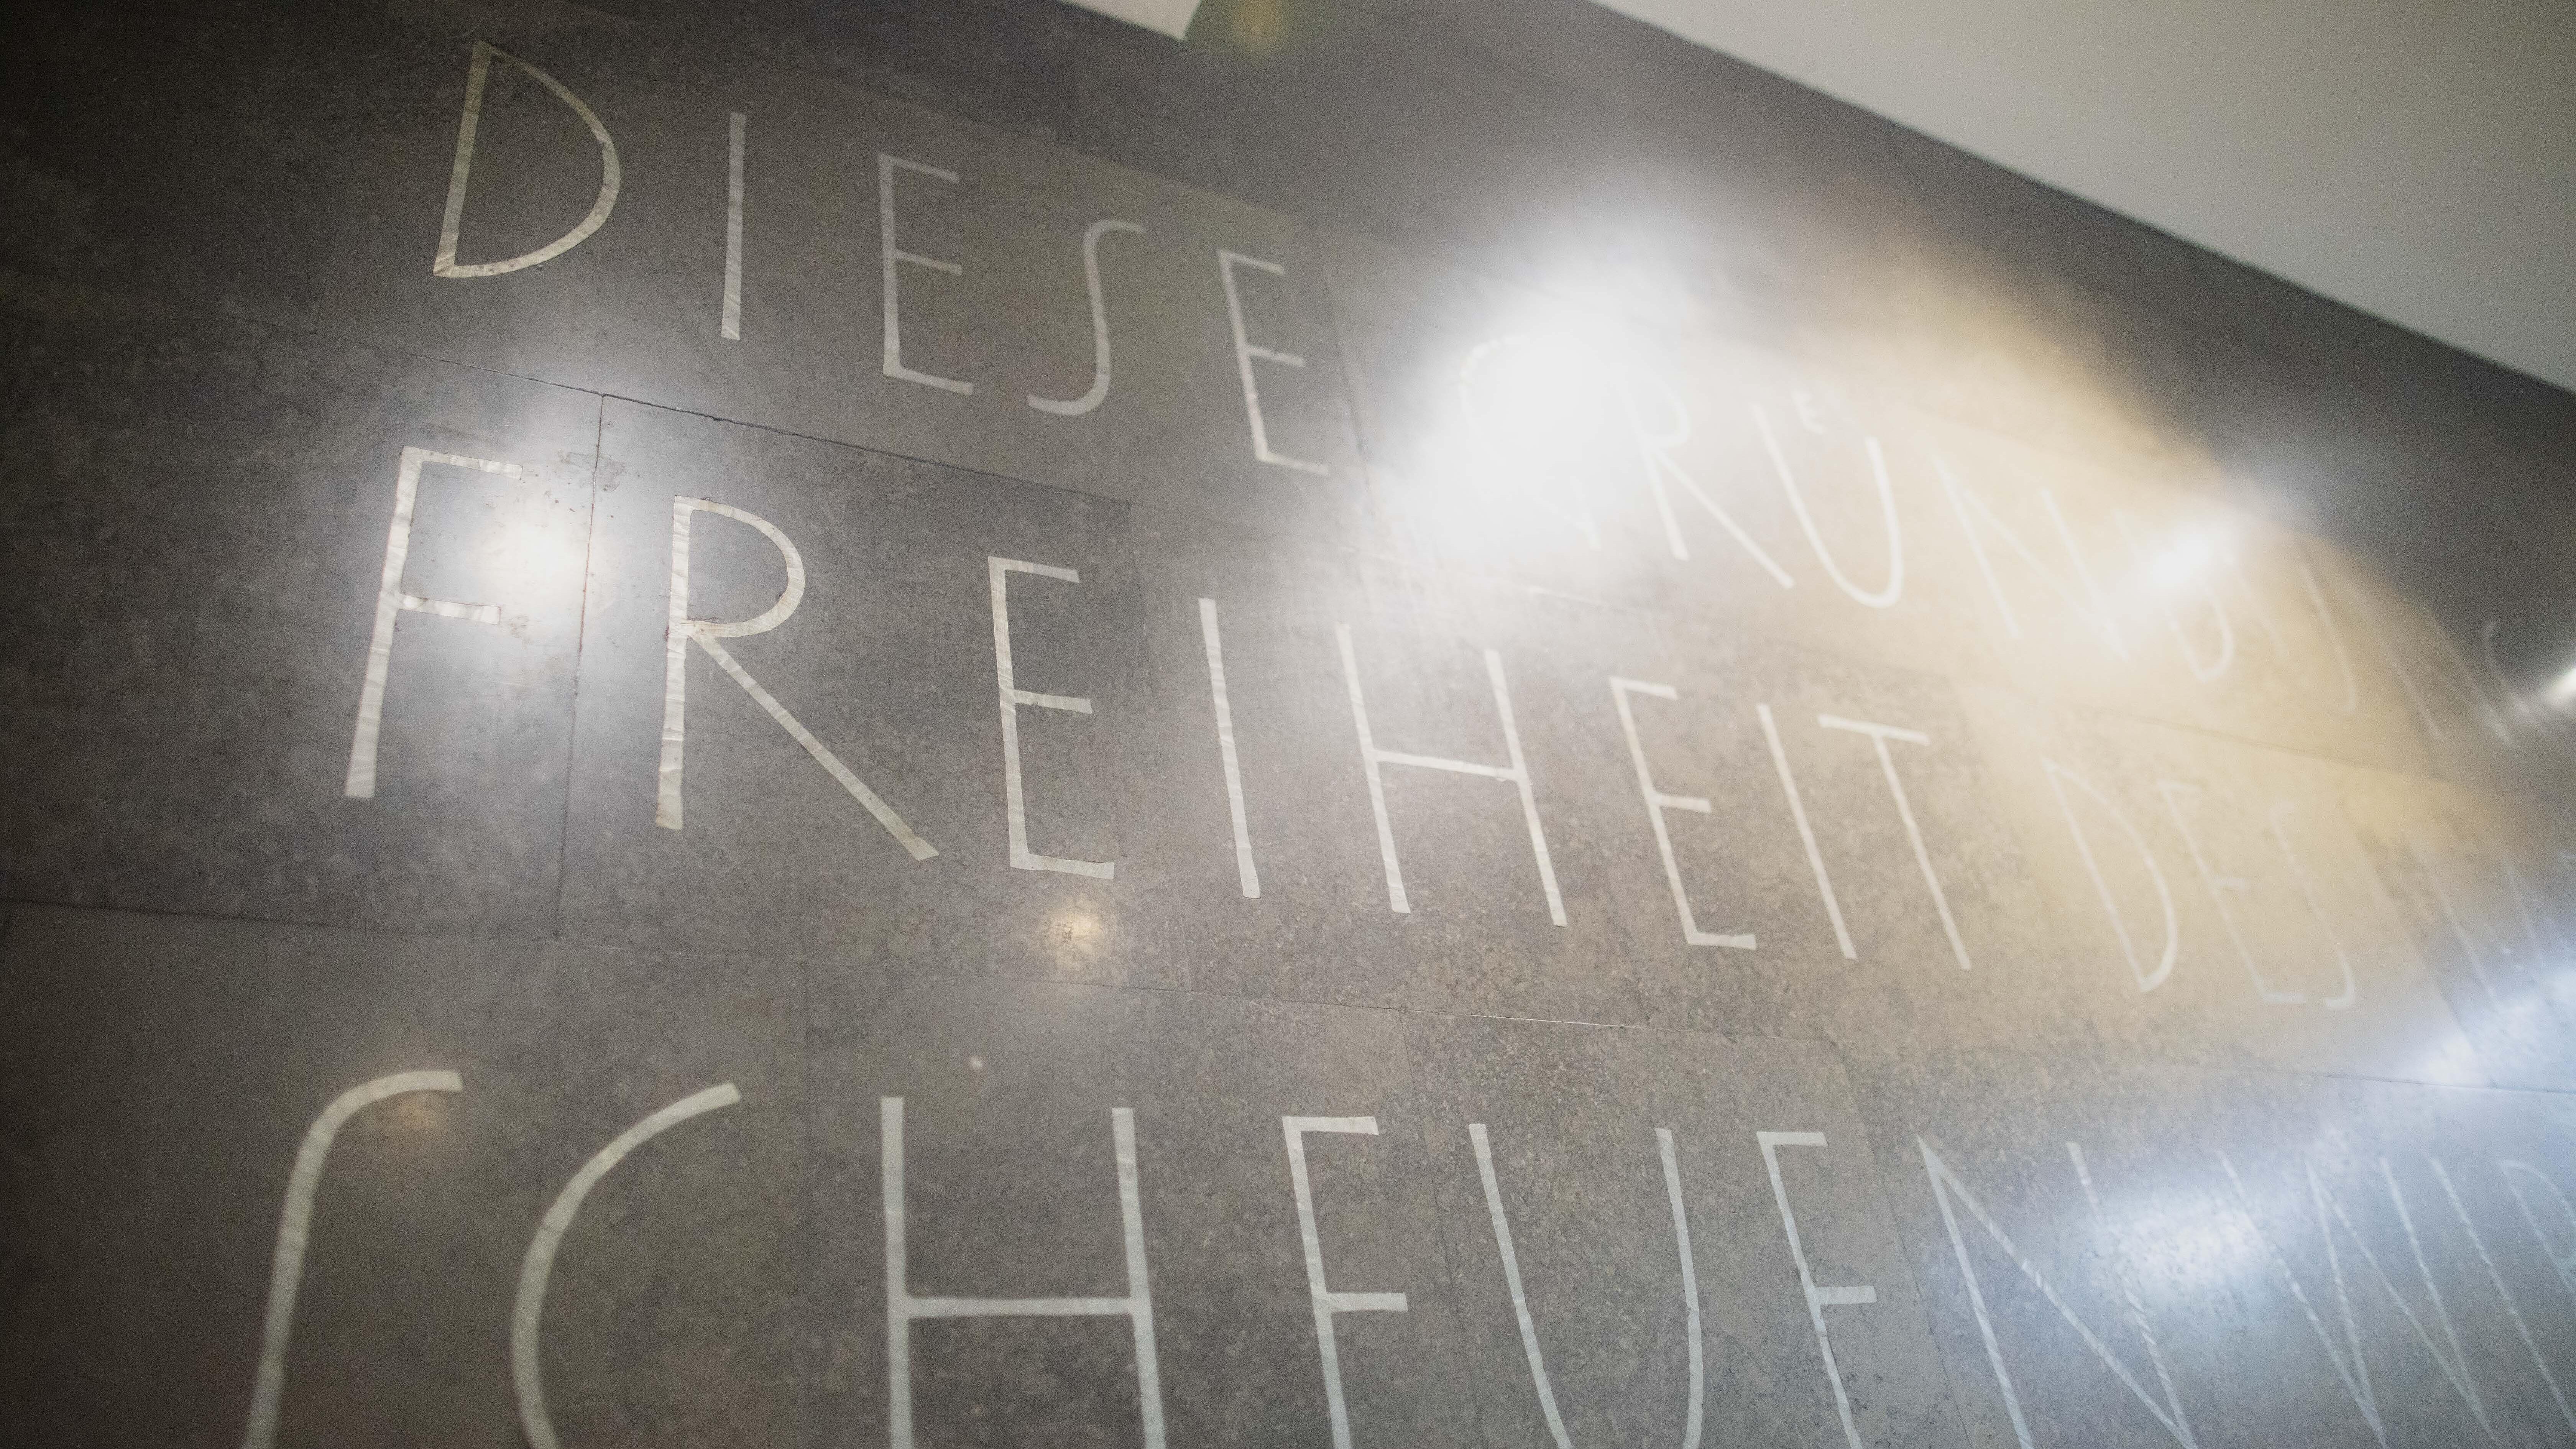 Photo of the lettering in the foyer of the AGB - the word freedom can be read